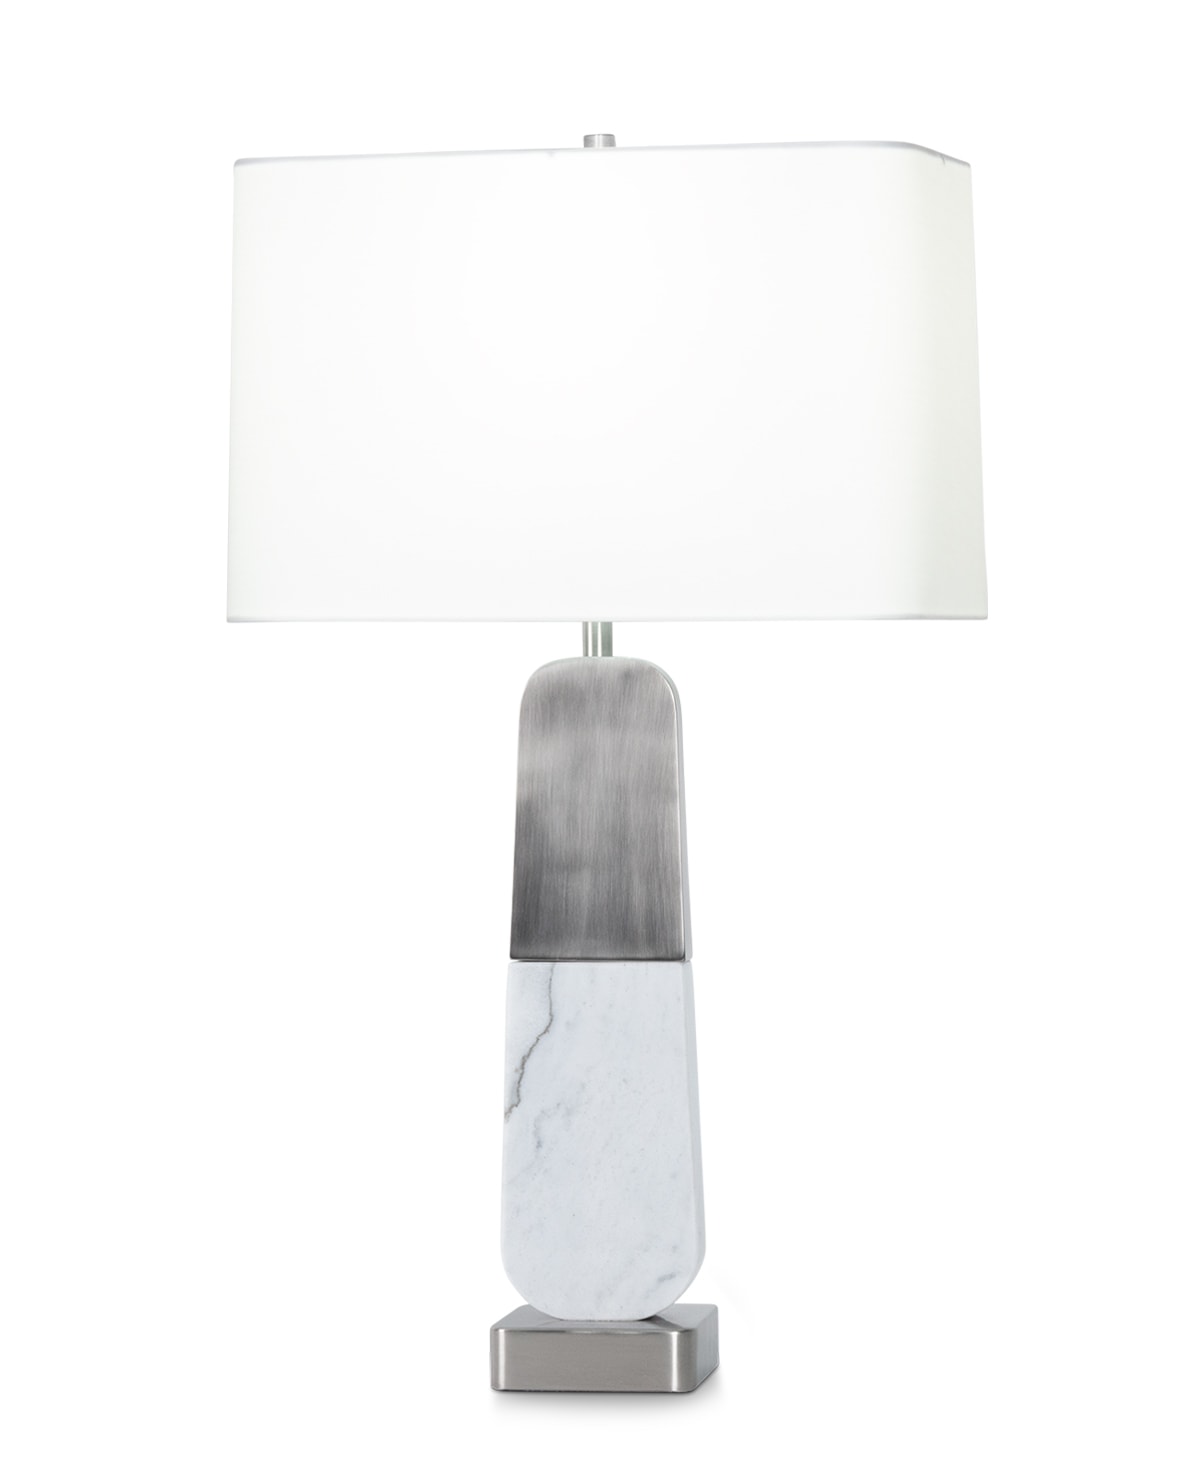 FlowDecor Naomi Table Lamp in white marble and metal with antique silver finish and white linen rounded rectangle shade (# 4559)